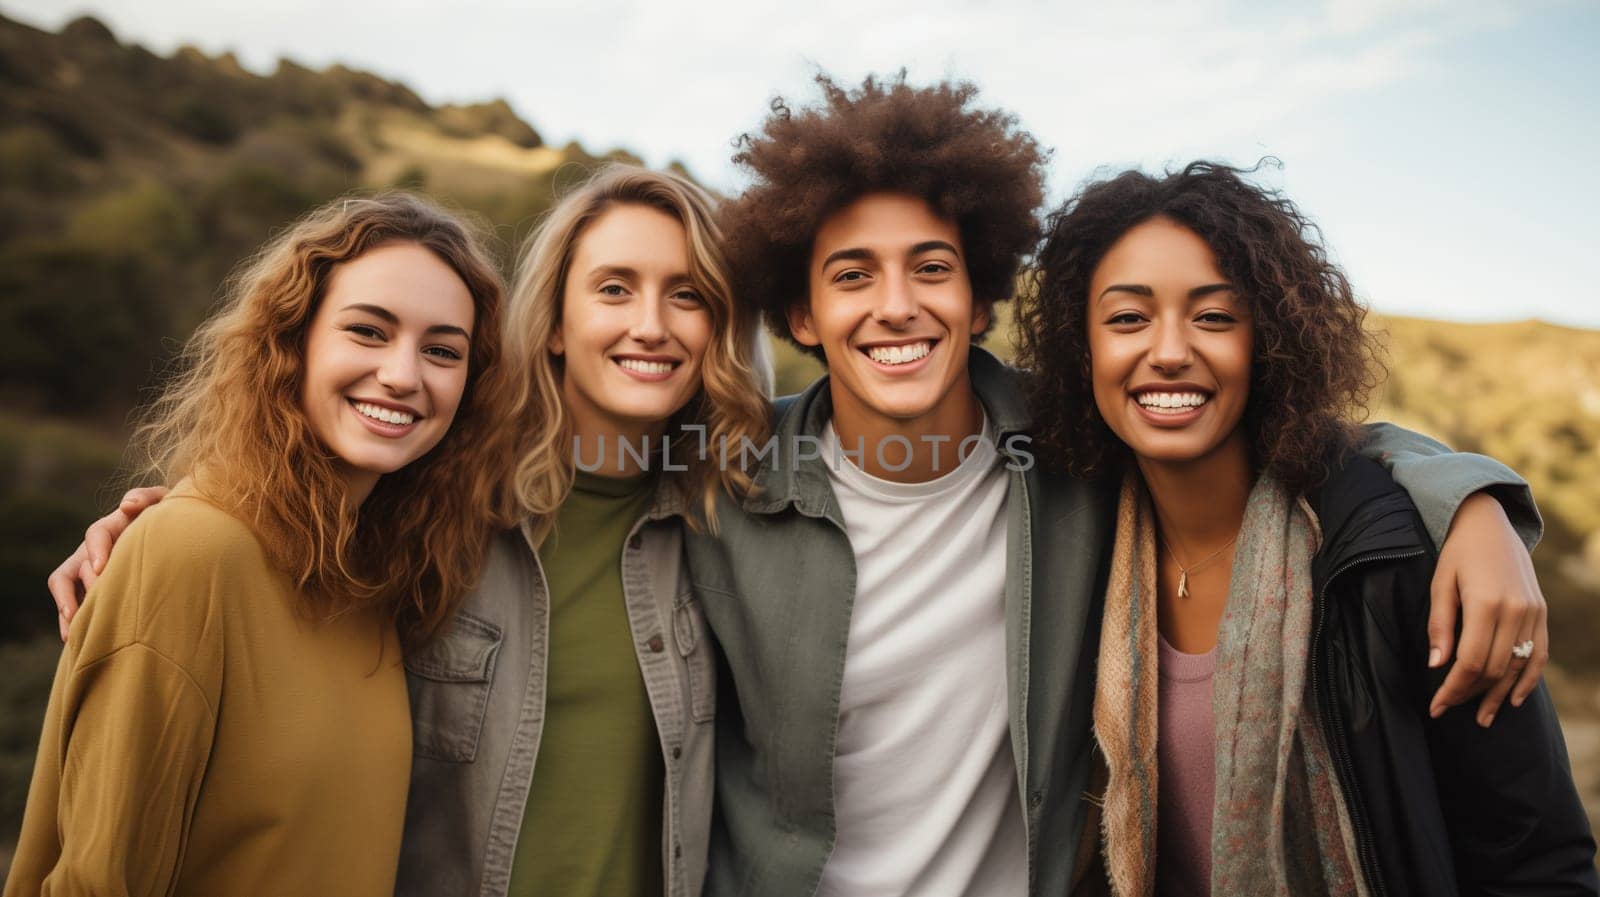 Friendly portrait of happy smiling diverse modern young people friends together, women and men in casual clothing posing on city street